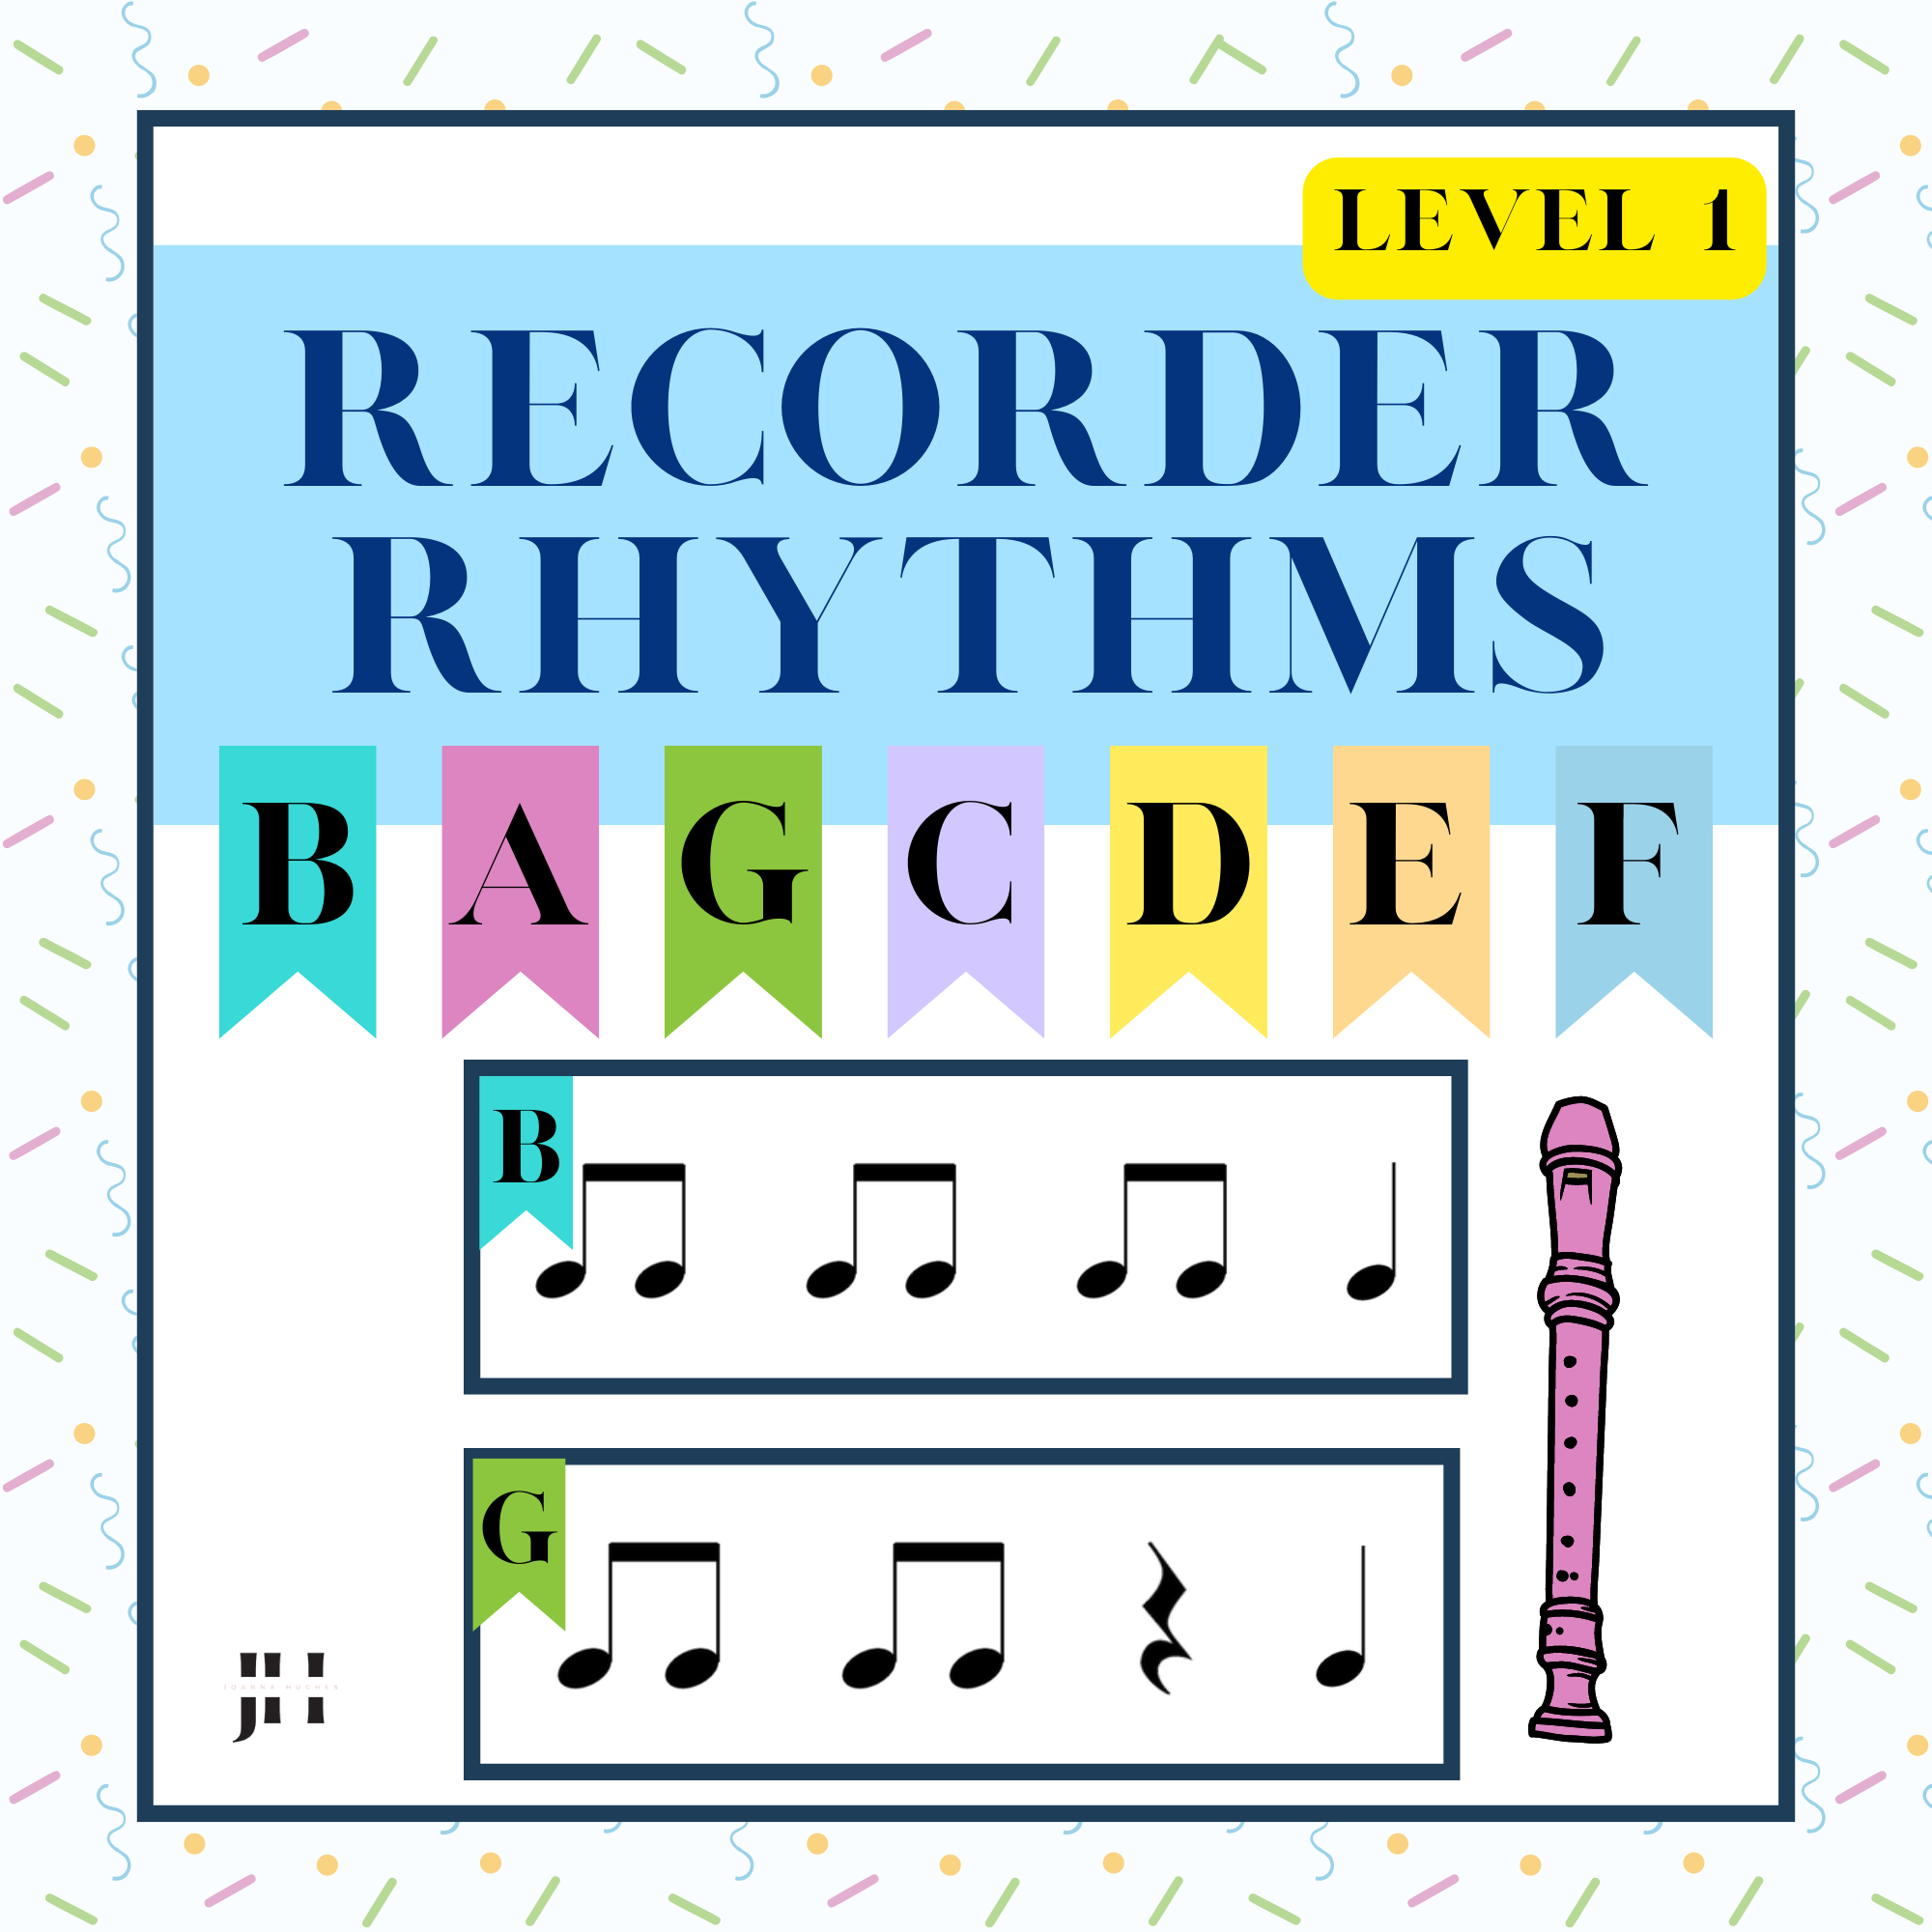 Recorder Rhythms for Centers Level 1 (Quarter notes/rest, Eighth notes)